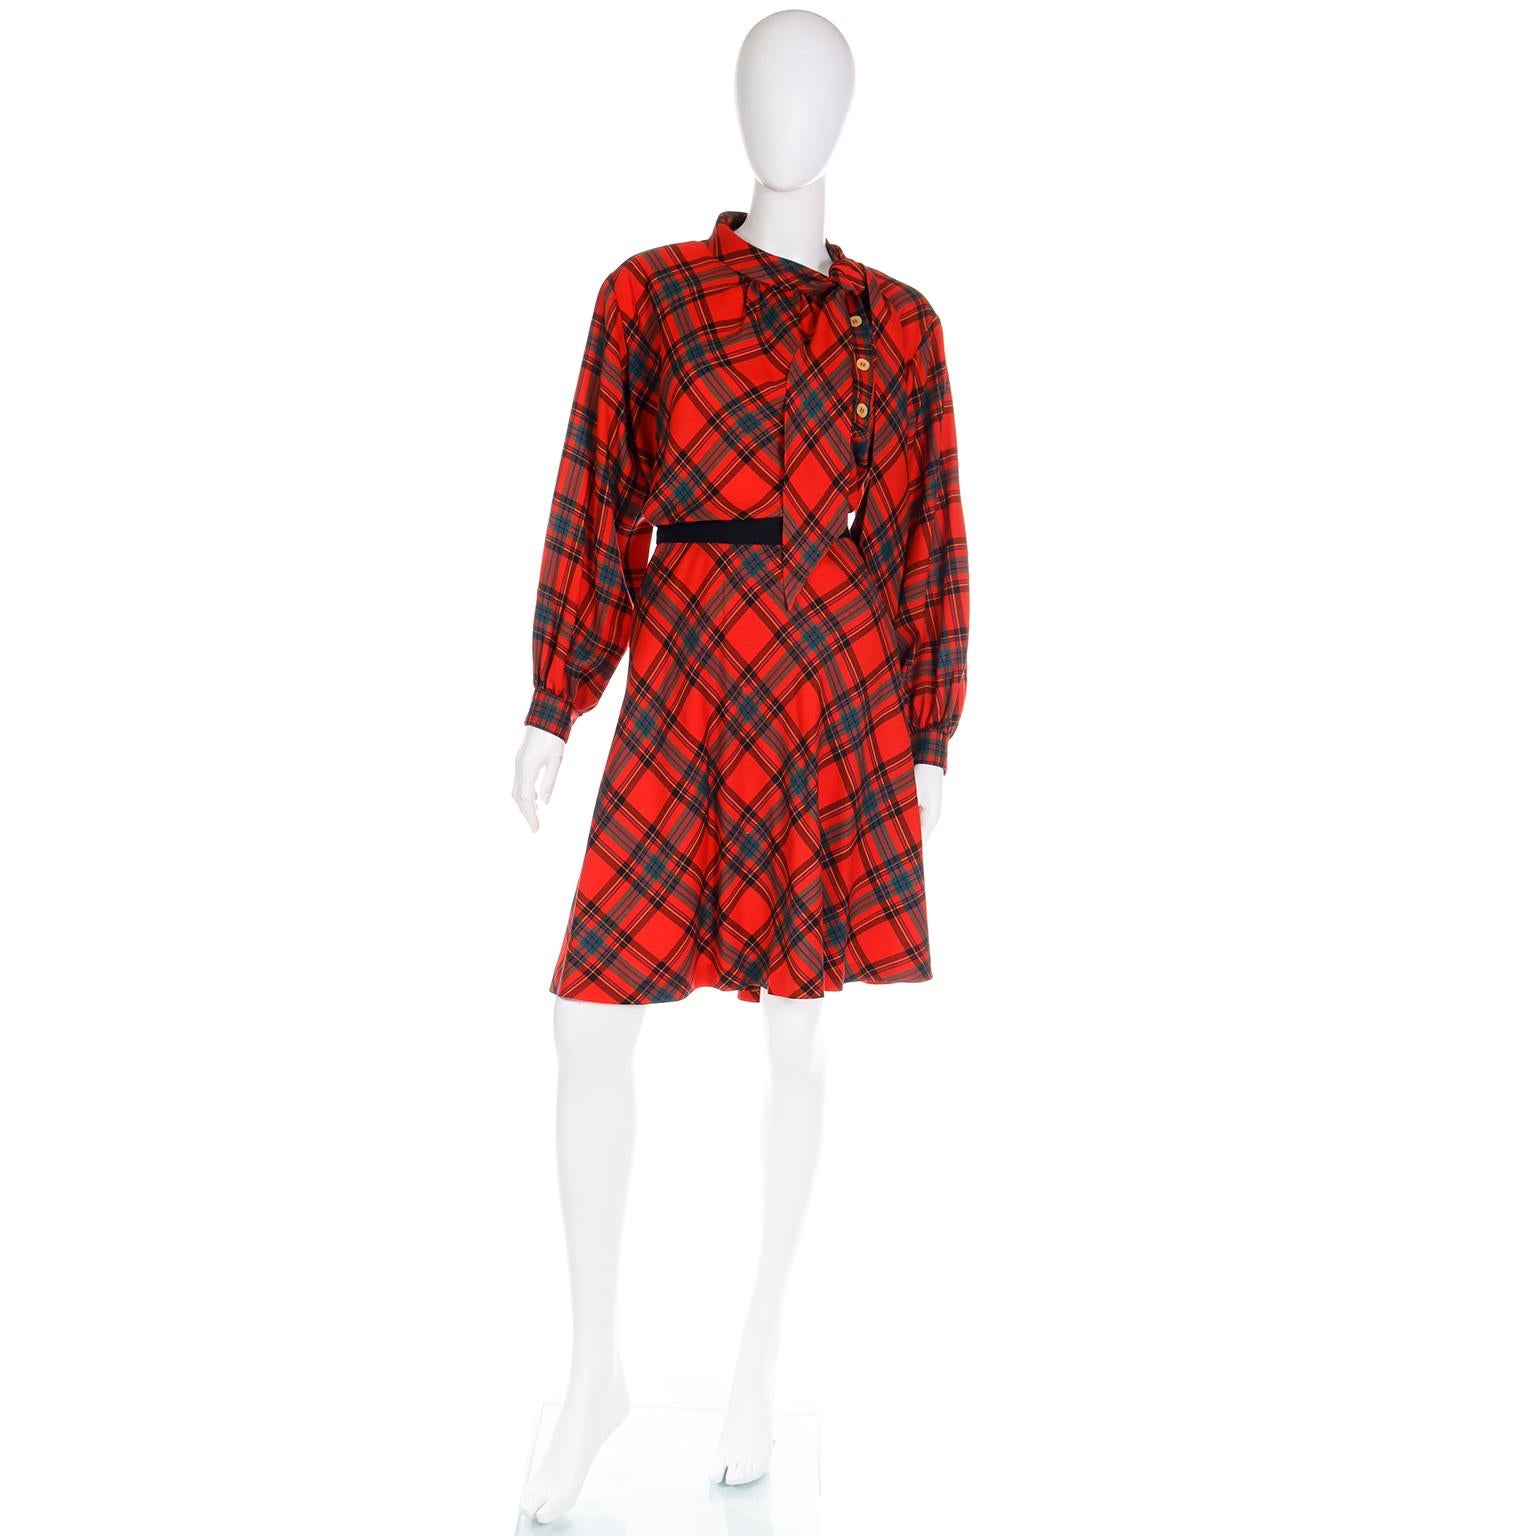 This vintage Fall / Winter 1987 Yves Saint Laurent outfit is a great testament to the staying power of Saint Laurent's impeccable style. When paired with modern accessories and shoes, this outfit looks contemporary and super sophisticated while